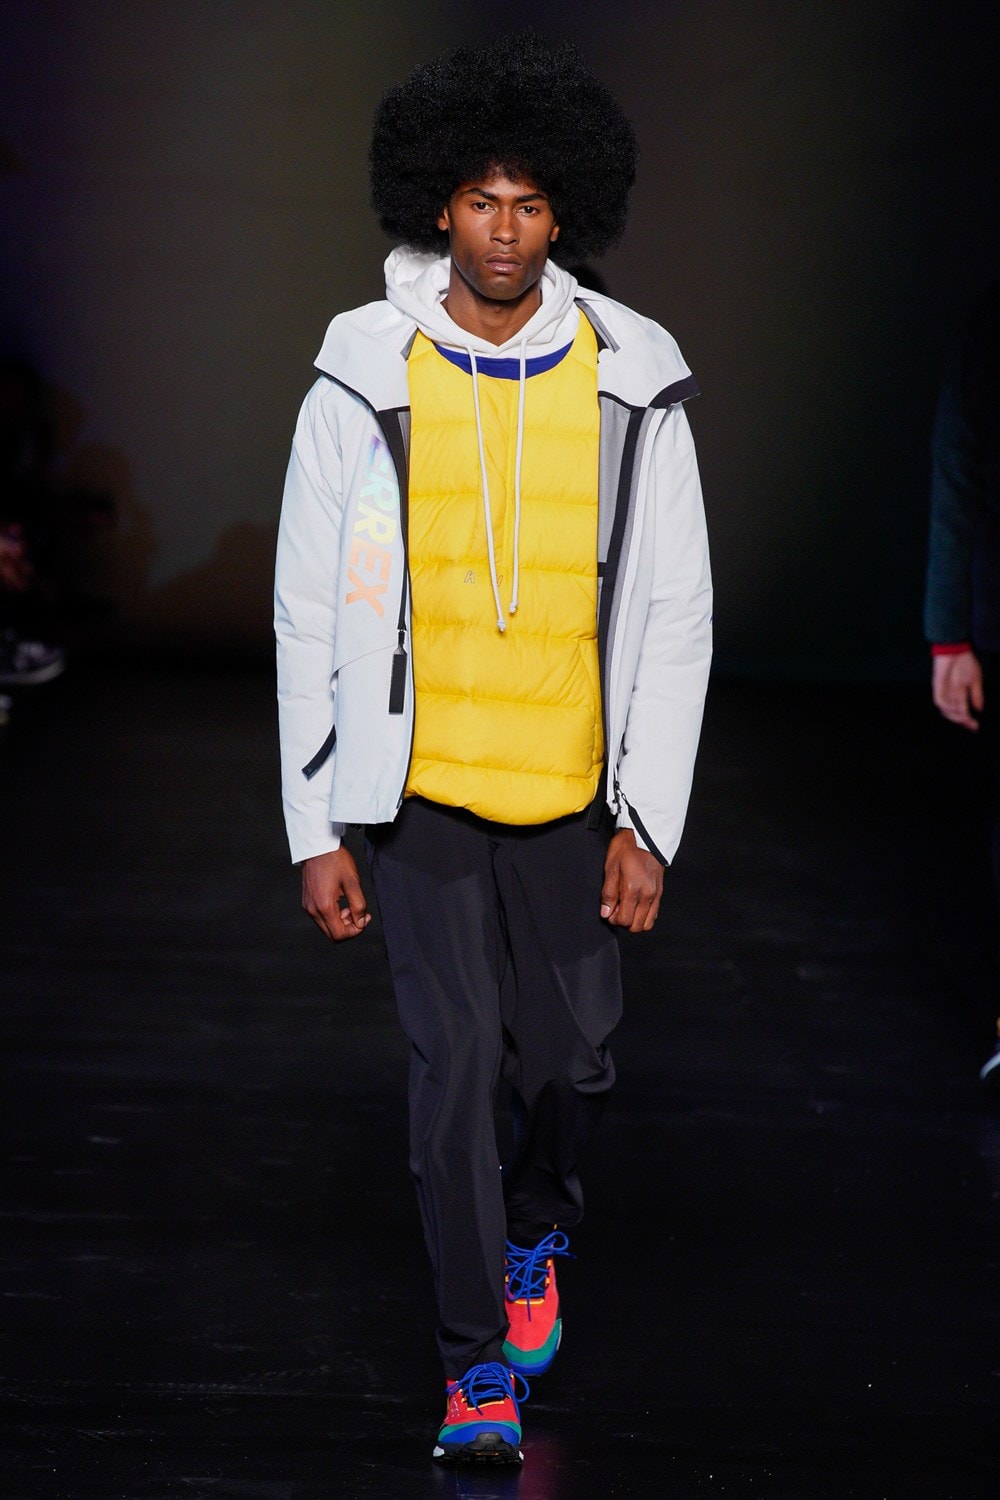 KITH Fall/Winter 2019 Runway Collection from NYFW